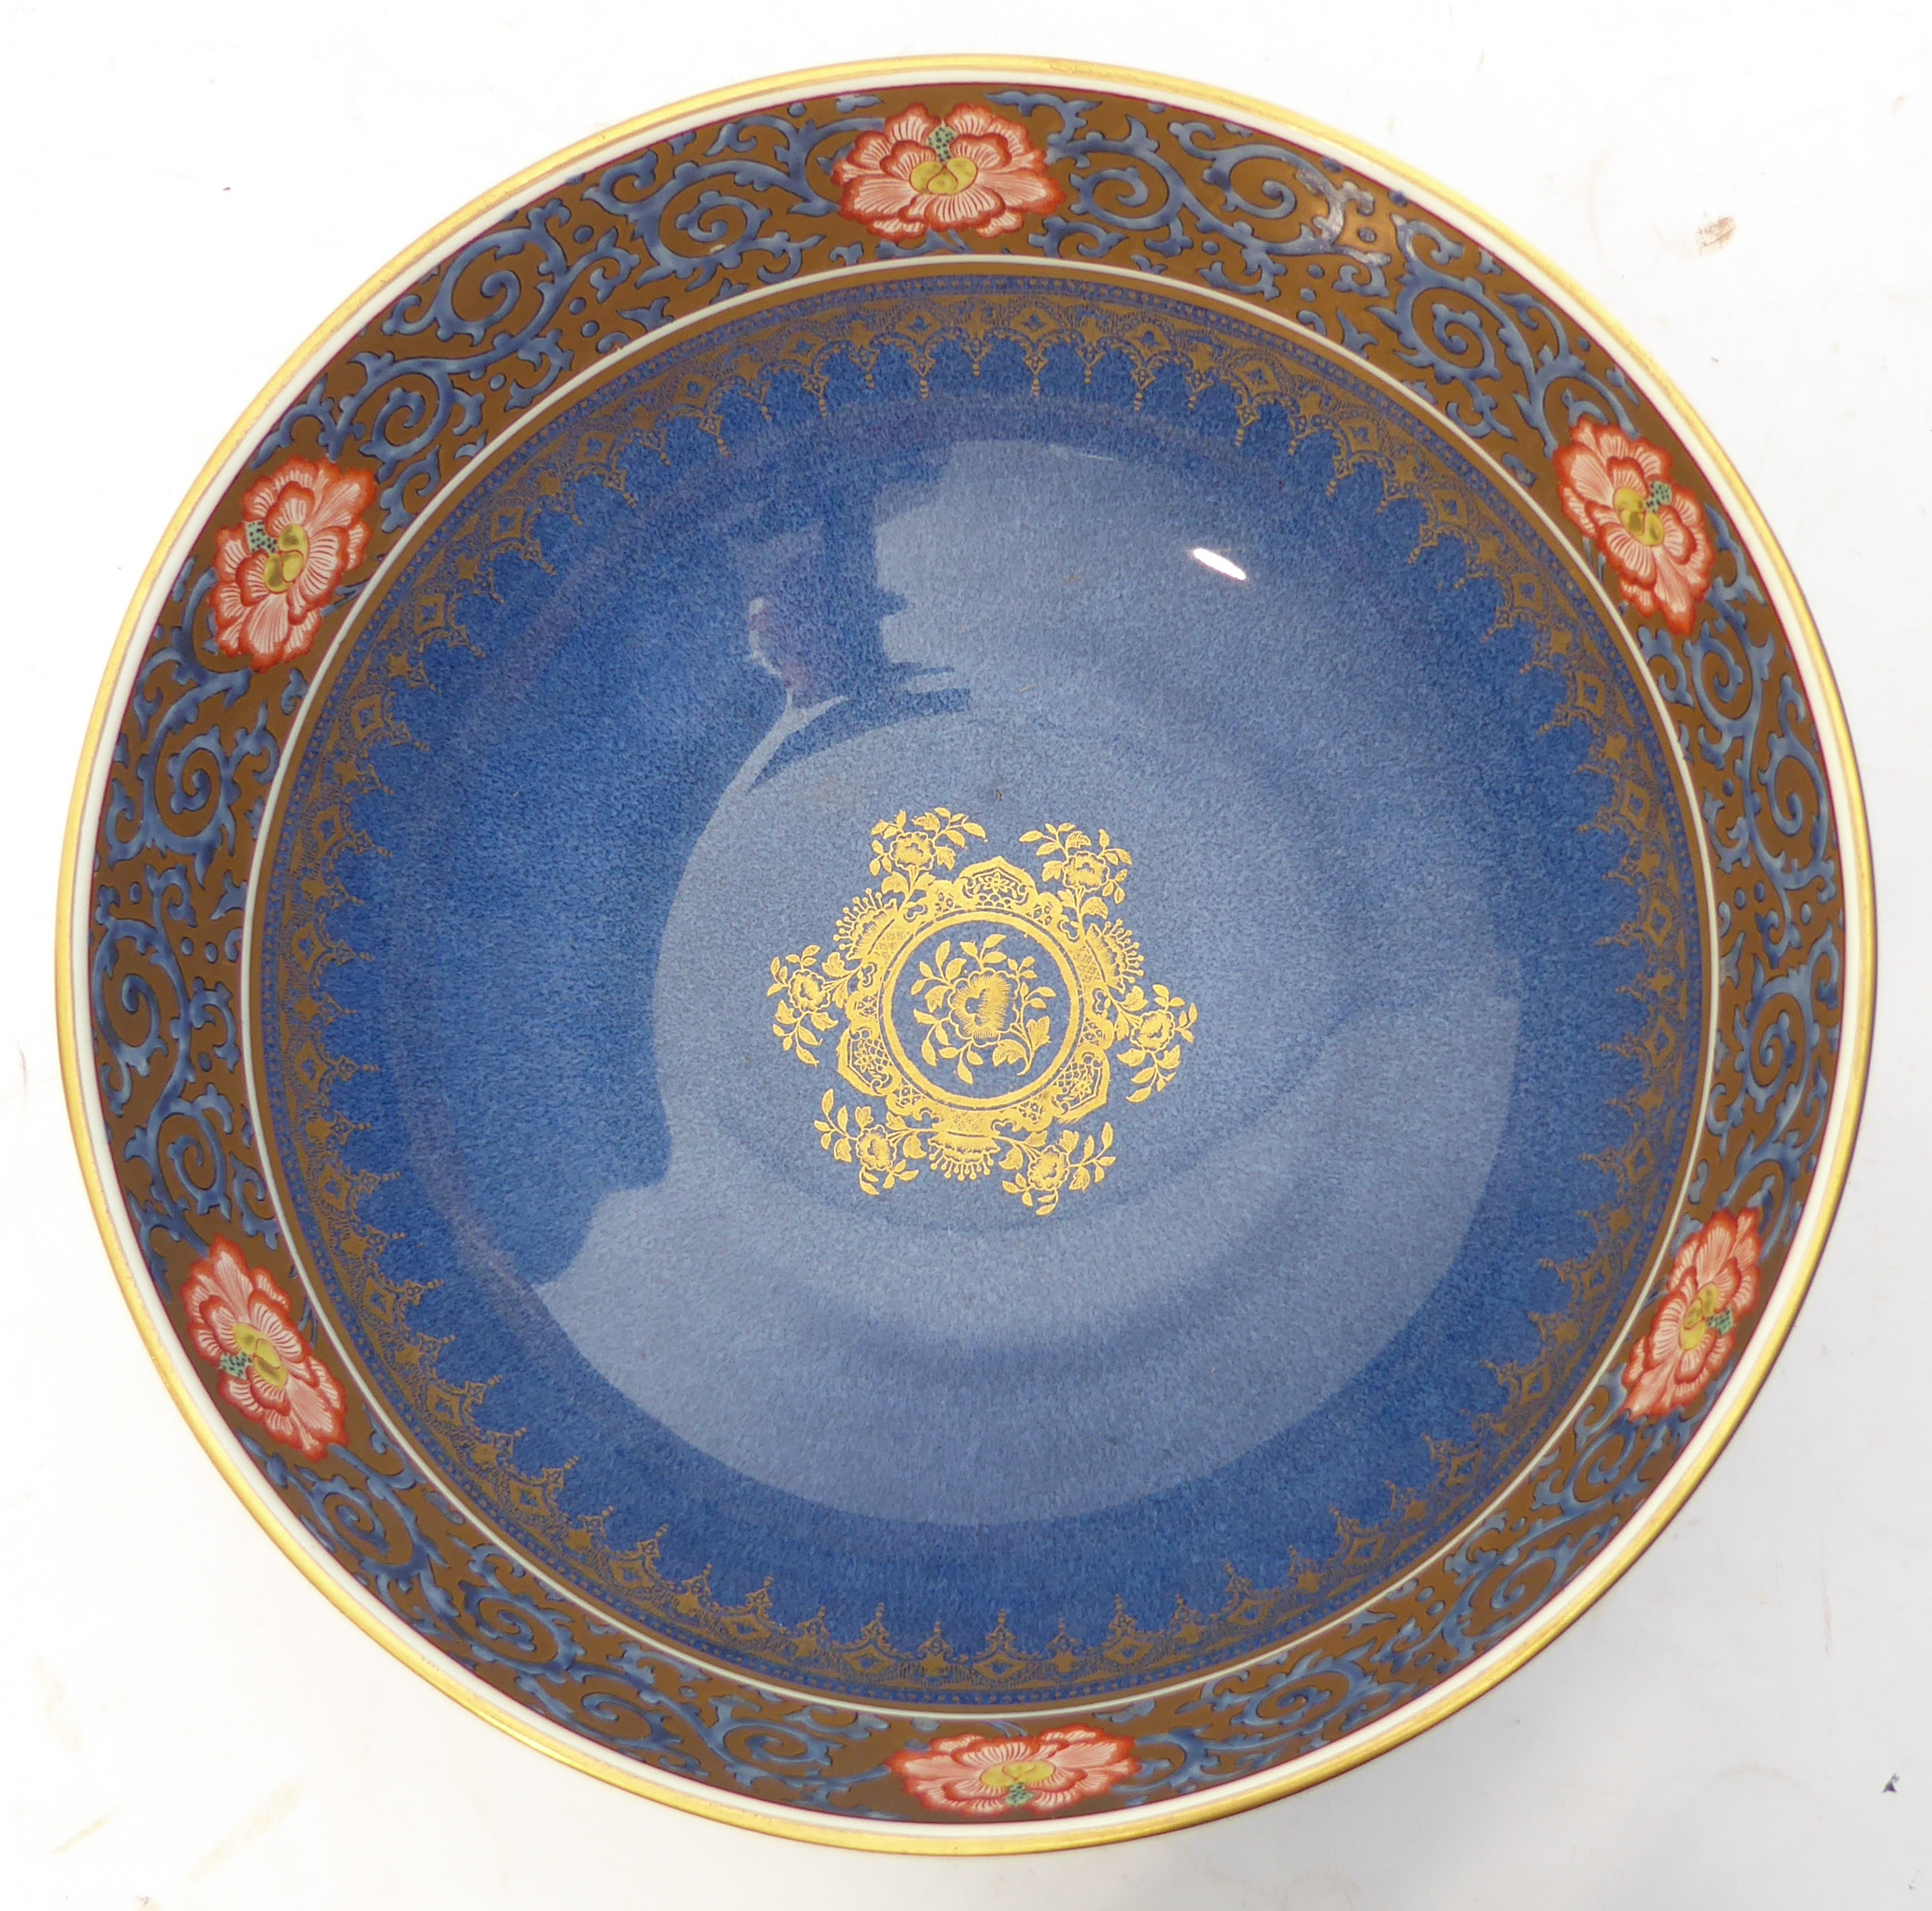 An early 20th century Wedgwood lustreware bowl: the central interior with a gilded floral motif - Image 4 of 6